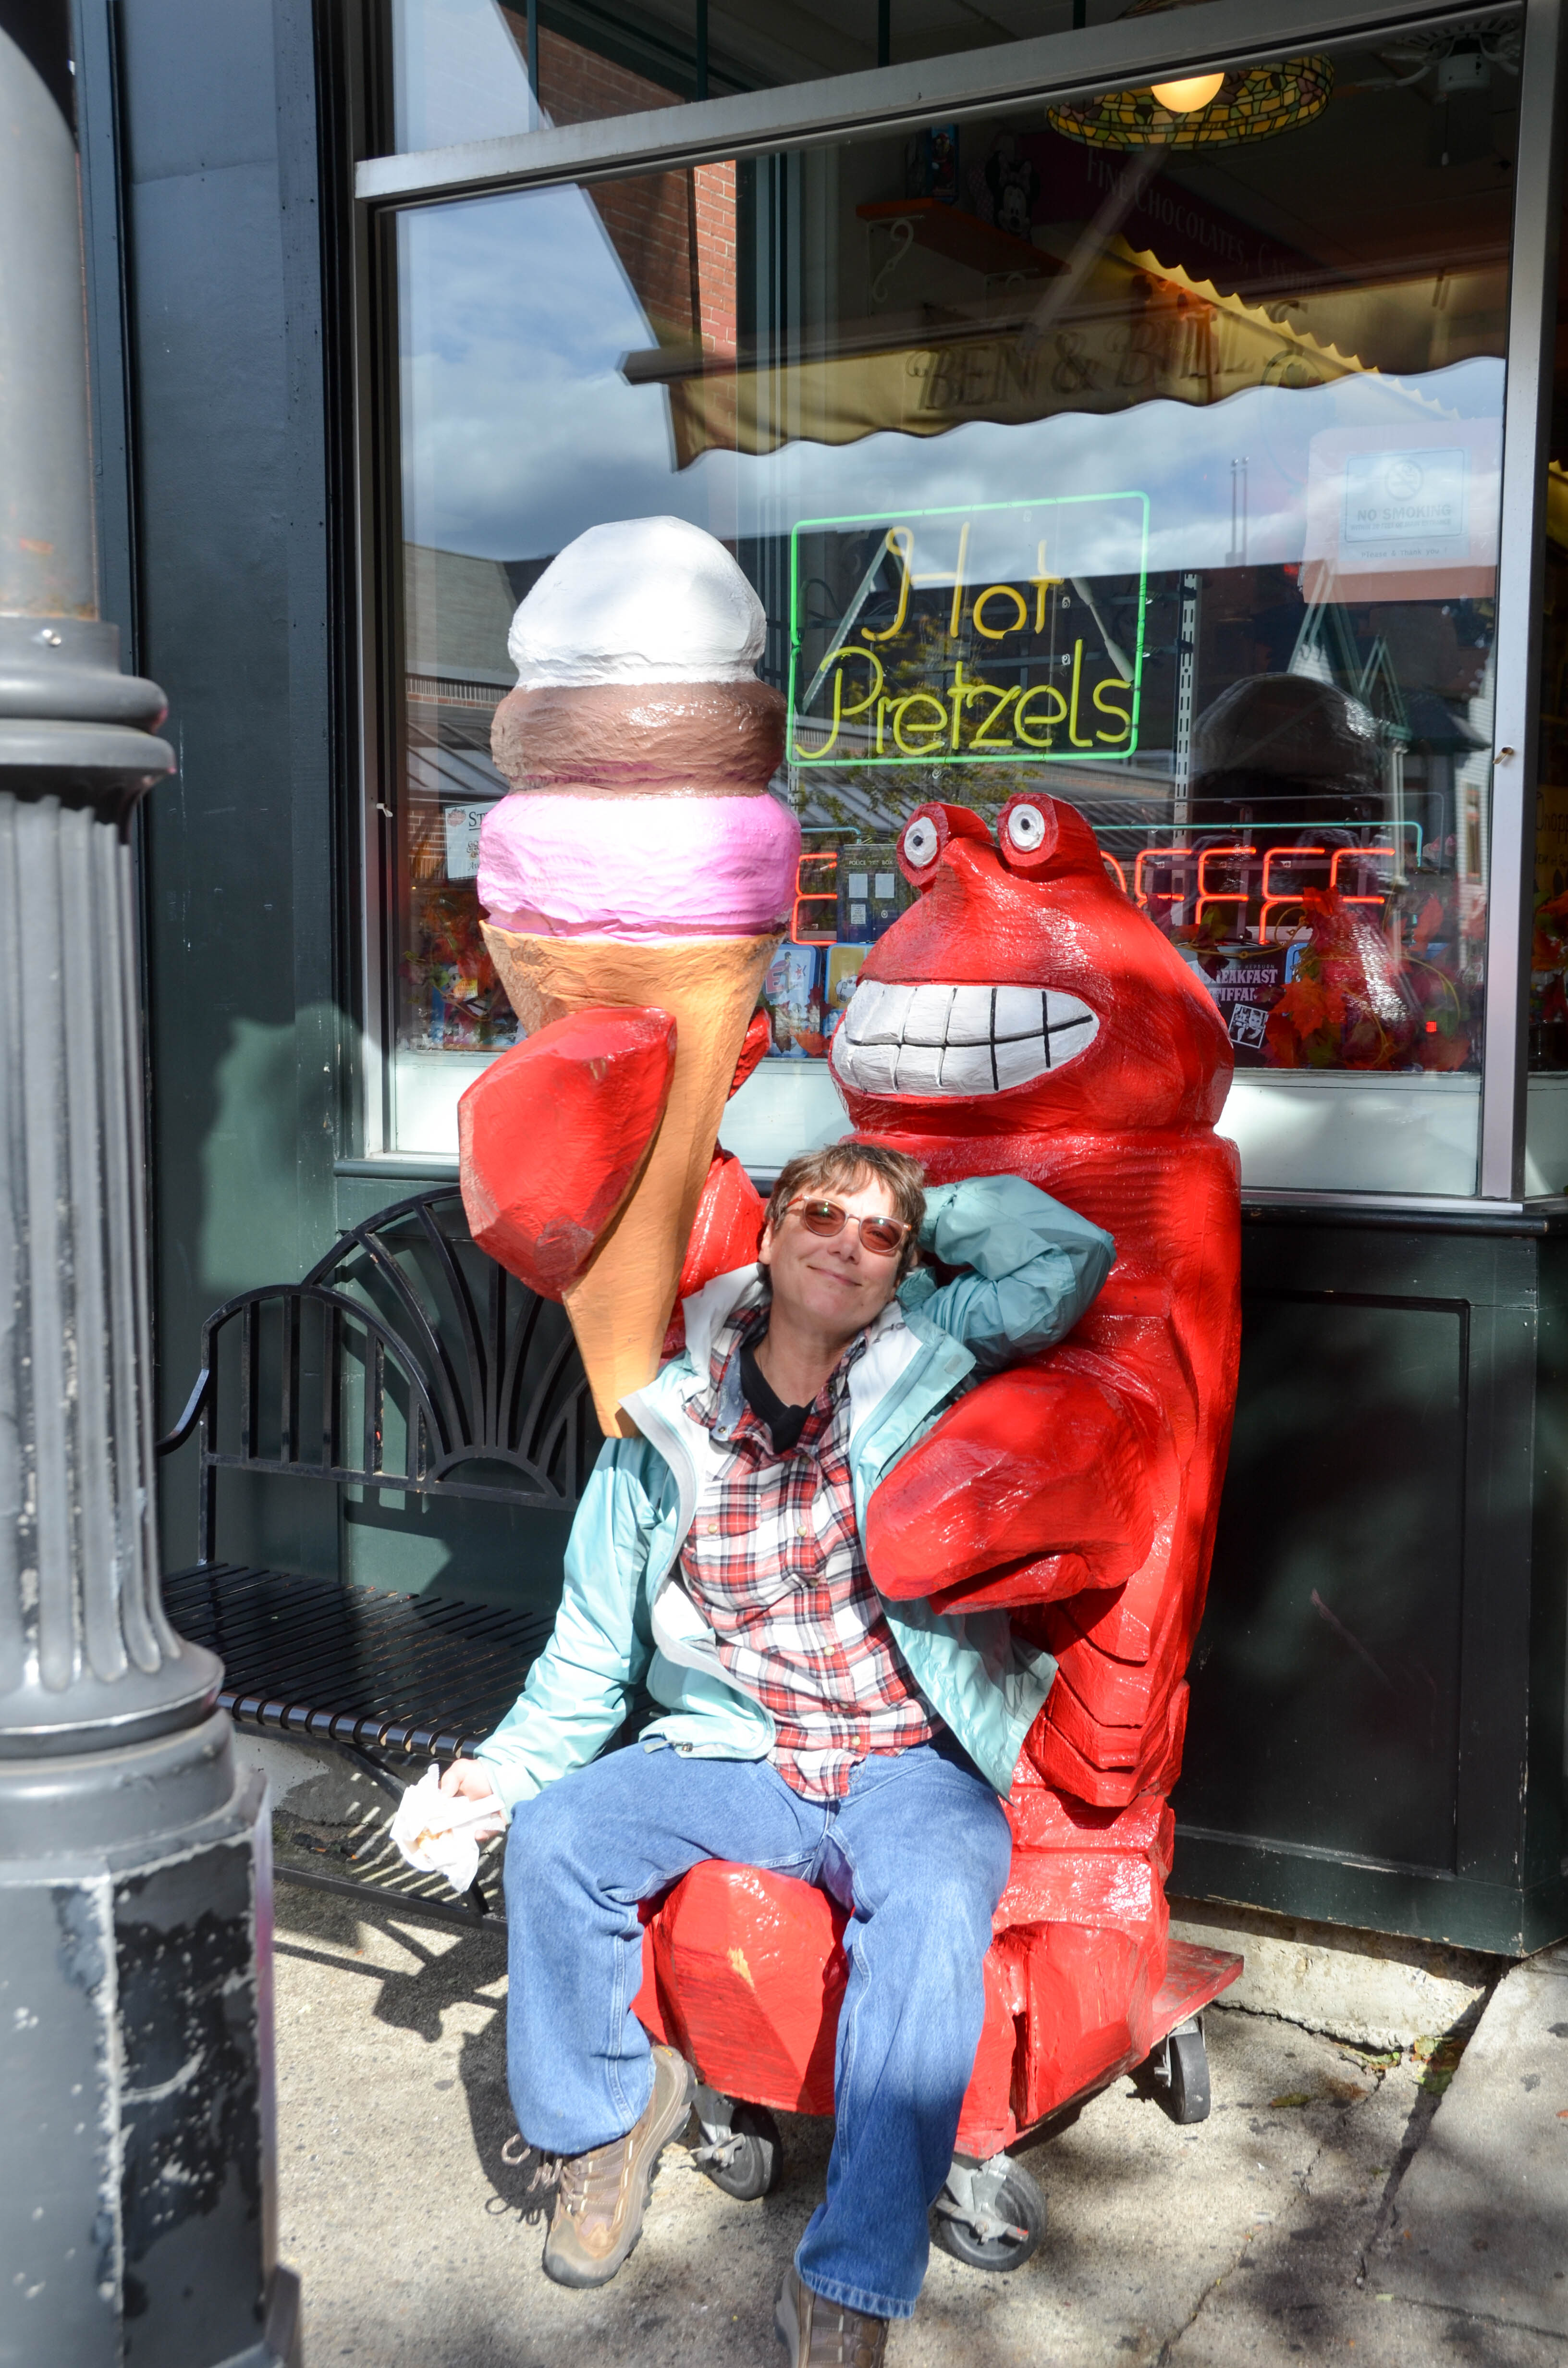 I pose with a lobster.